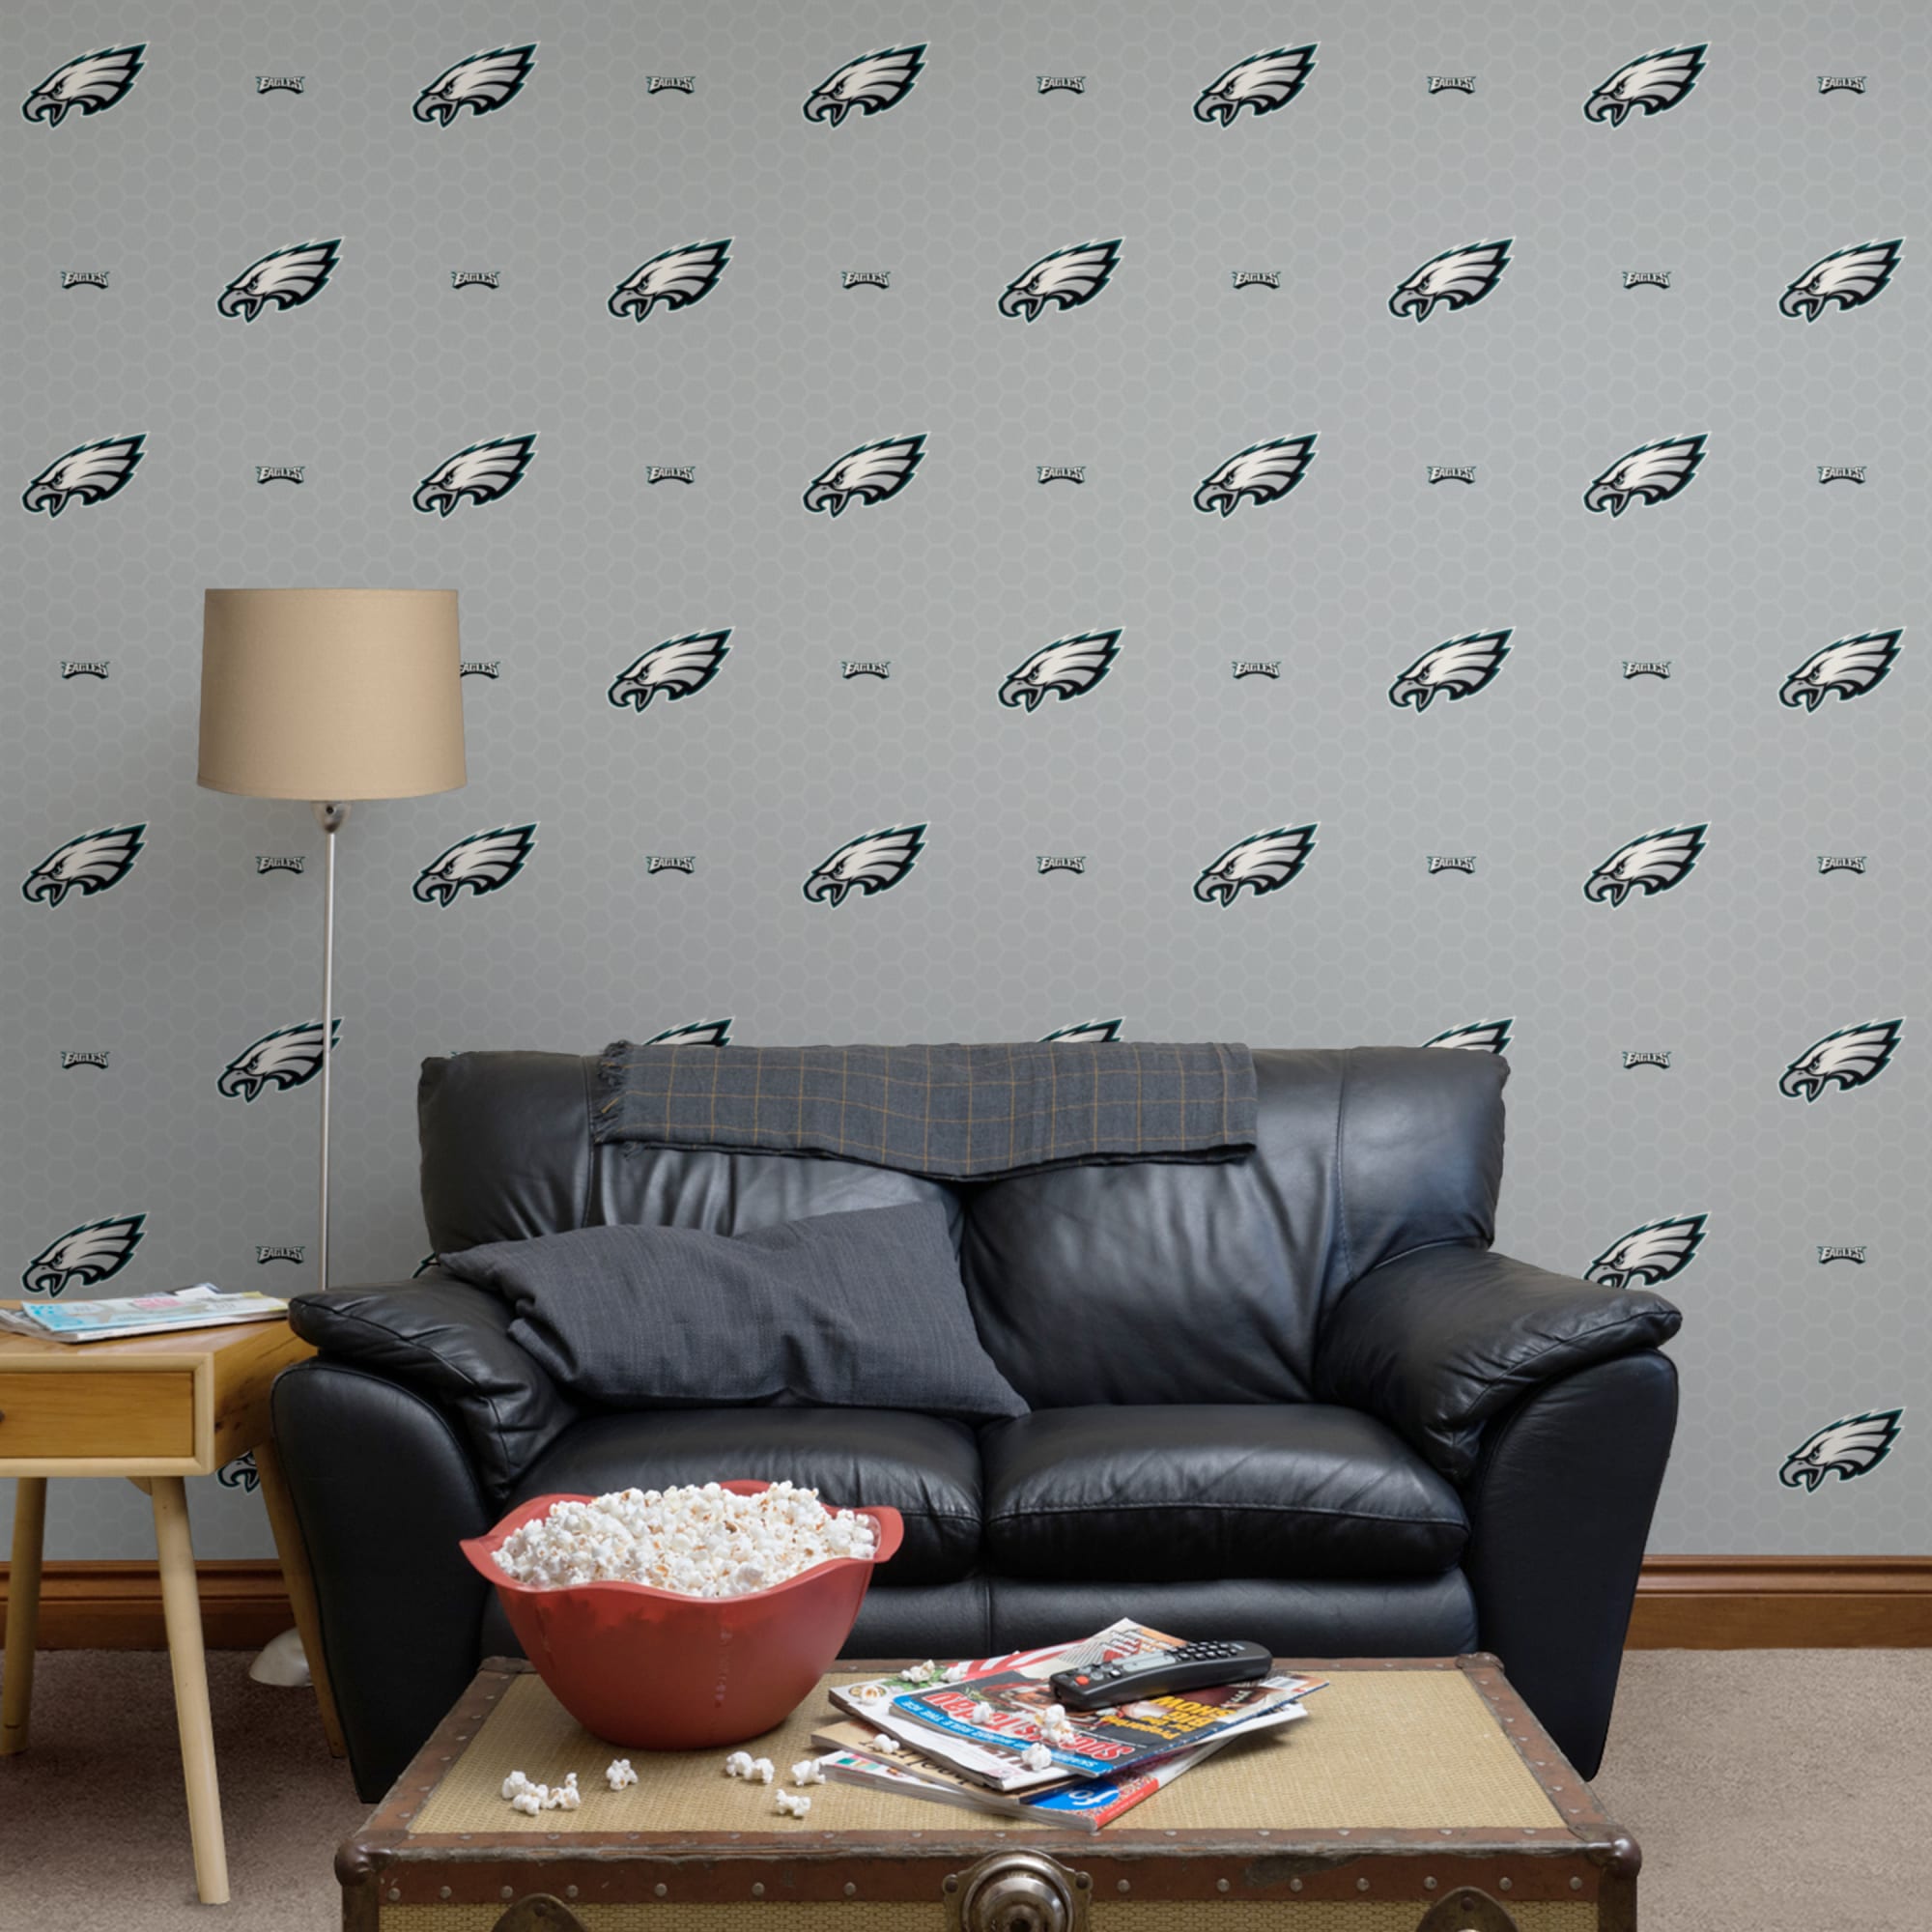 Philadelphia Eagles: Logo Pattern - Officially Licensed NFL Removable Wallpaper 12" x 12" Sample by Fathead